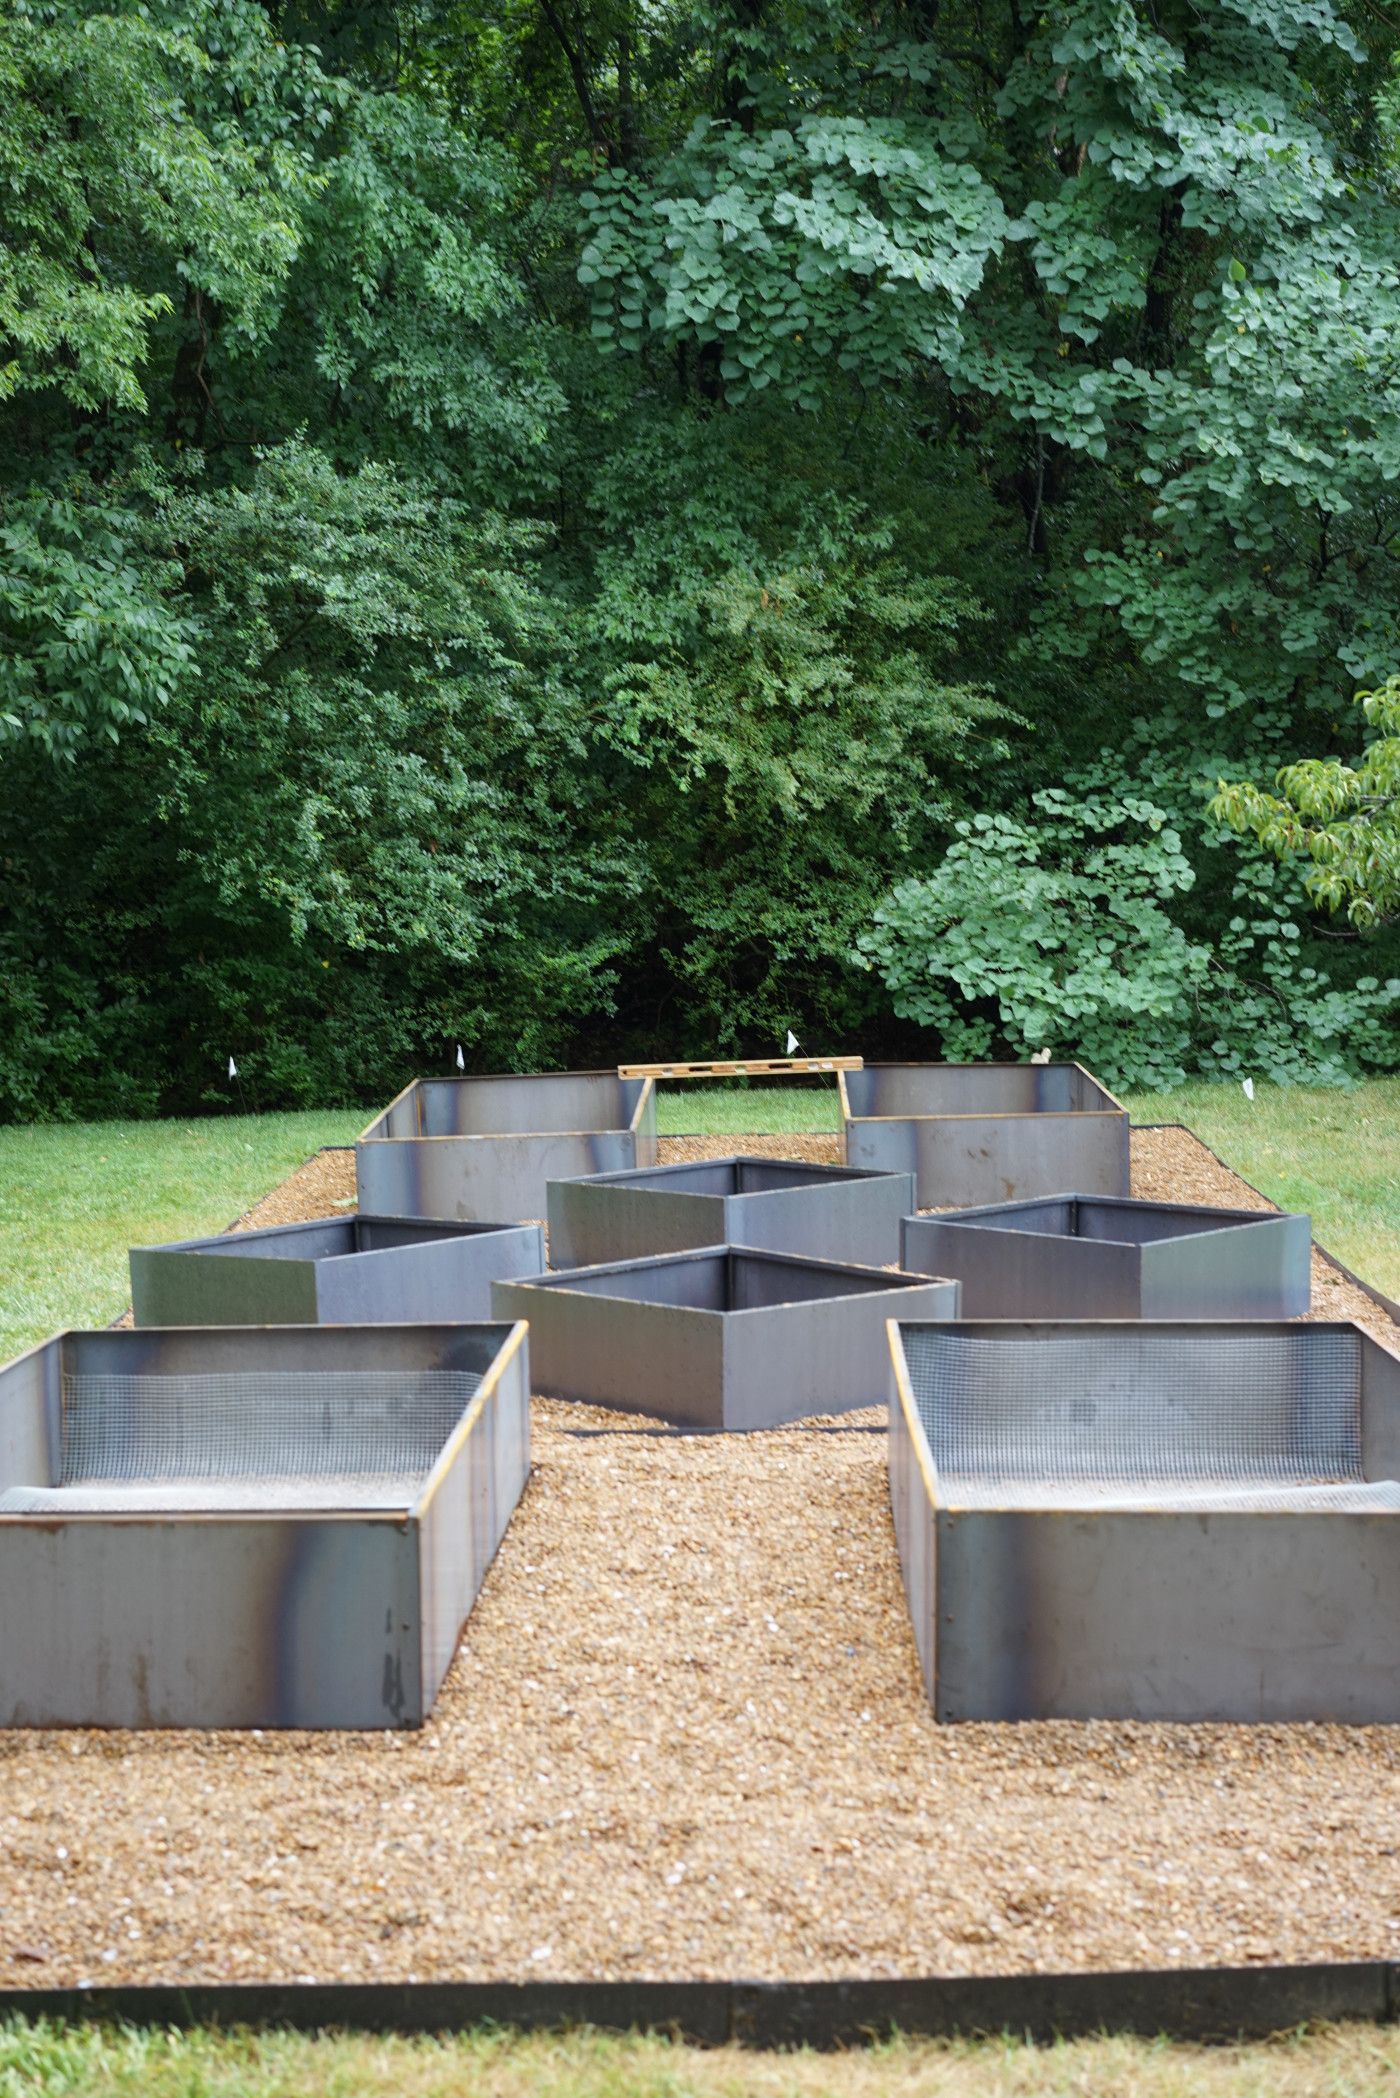 Durable and Stylish: The Advantages of Metal Raised Garden Beds